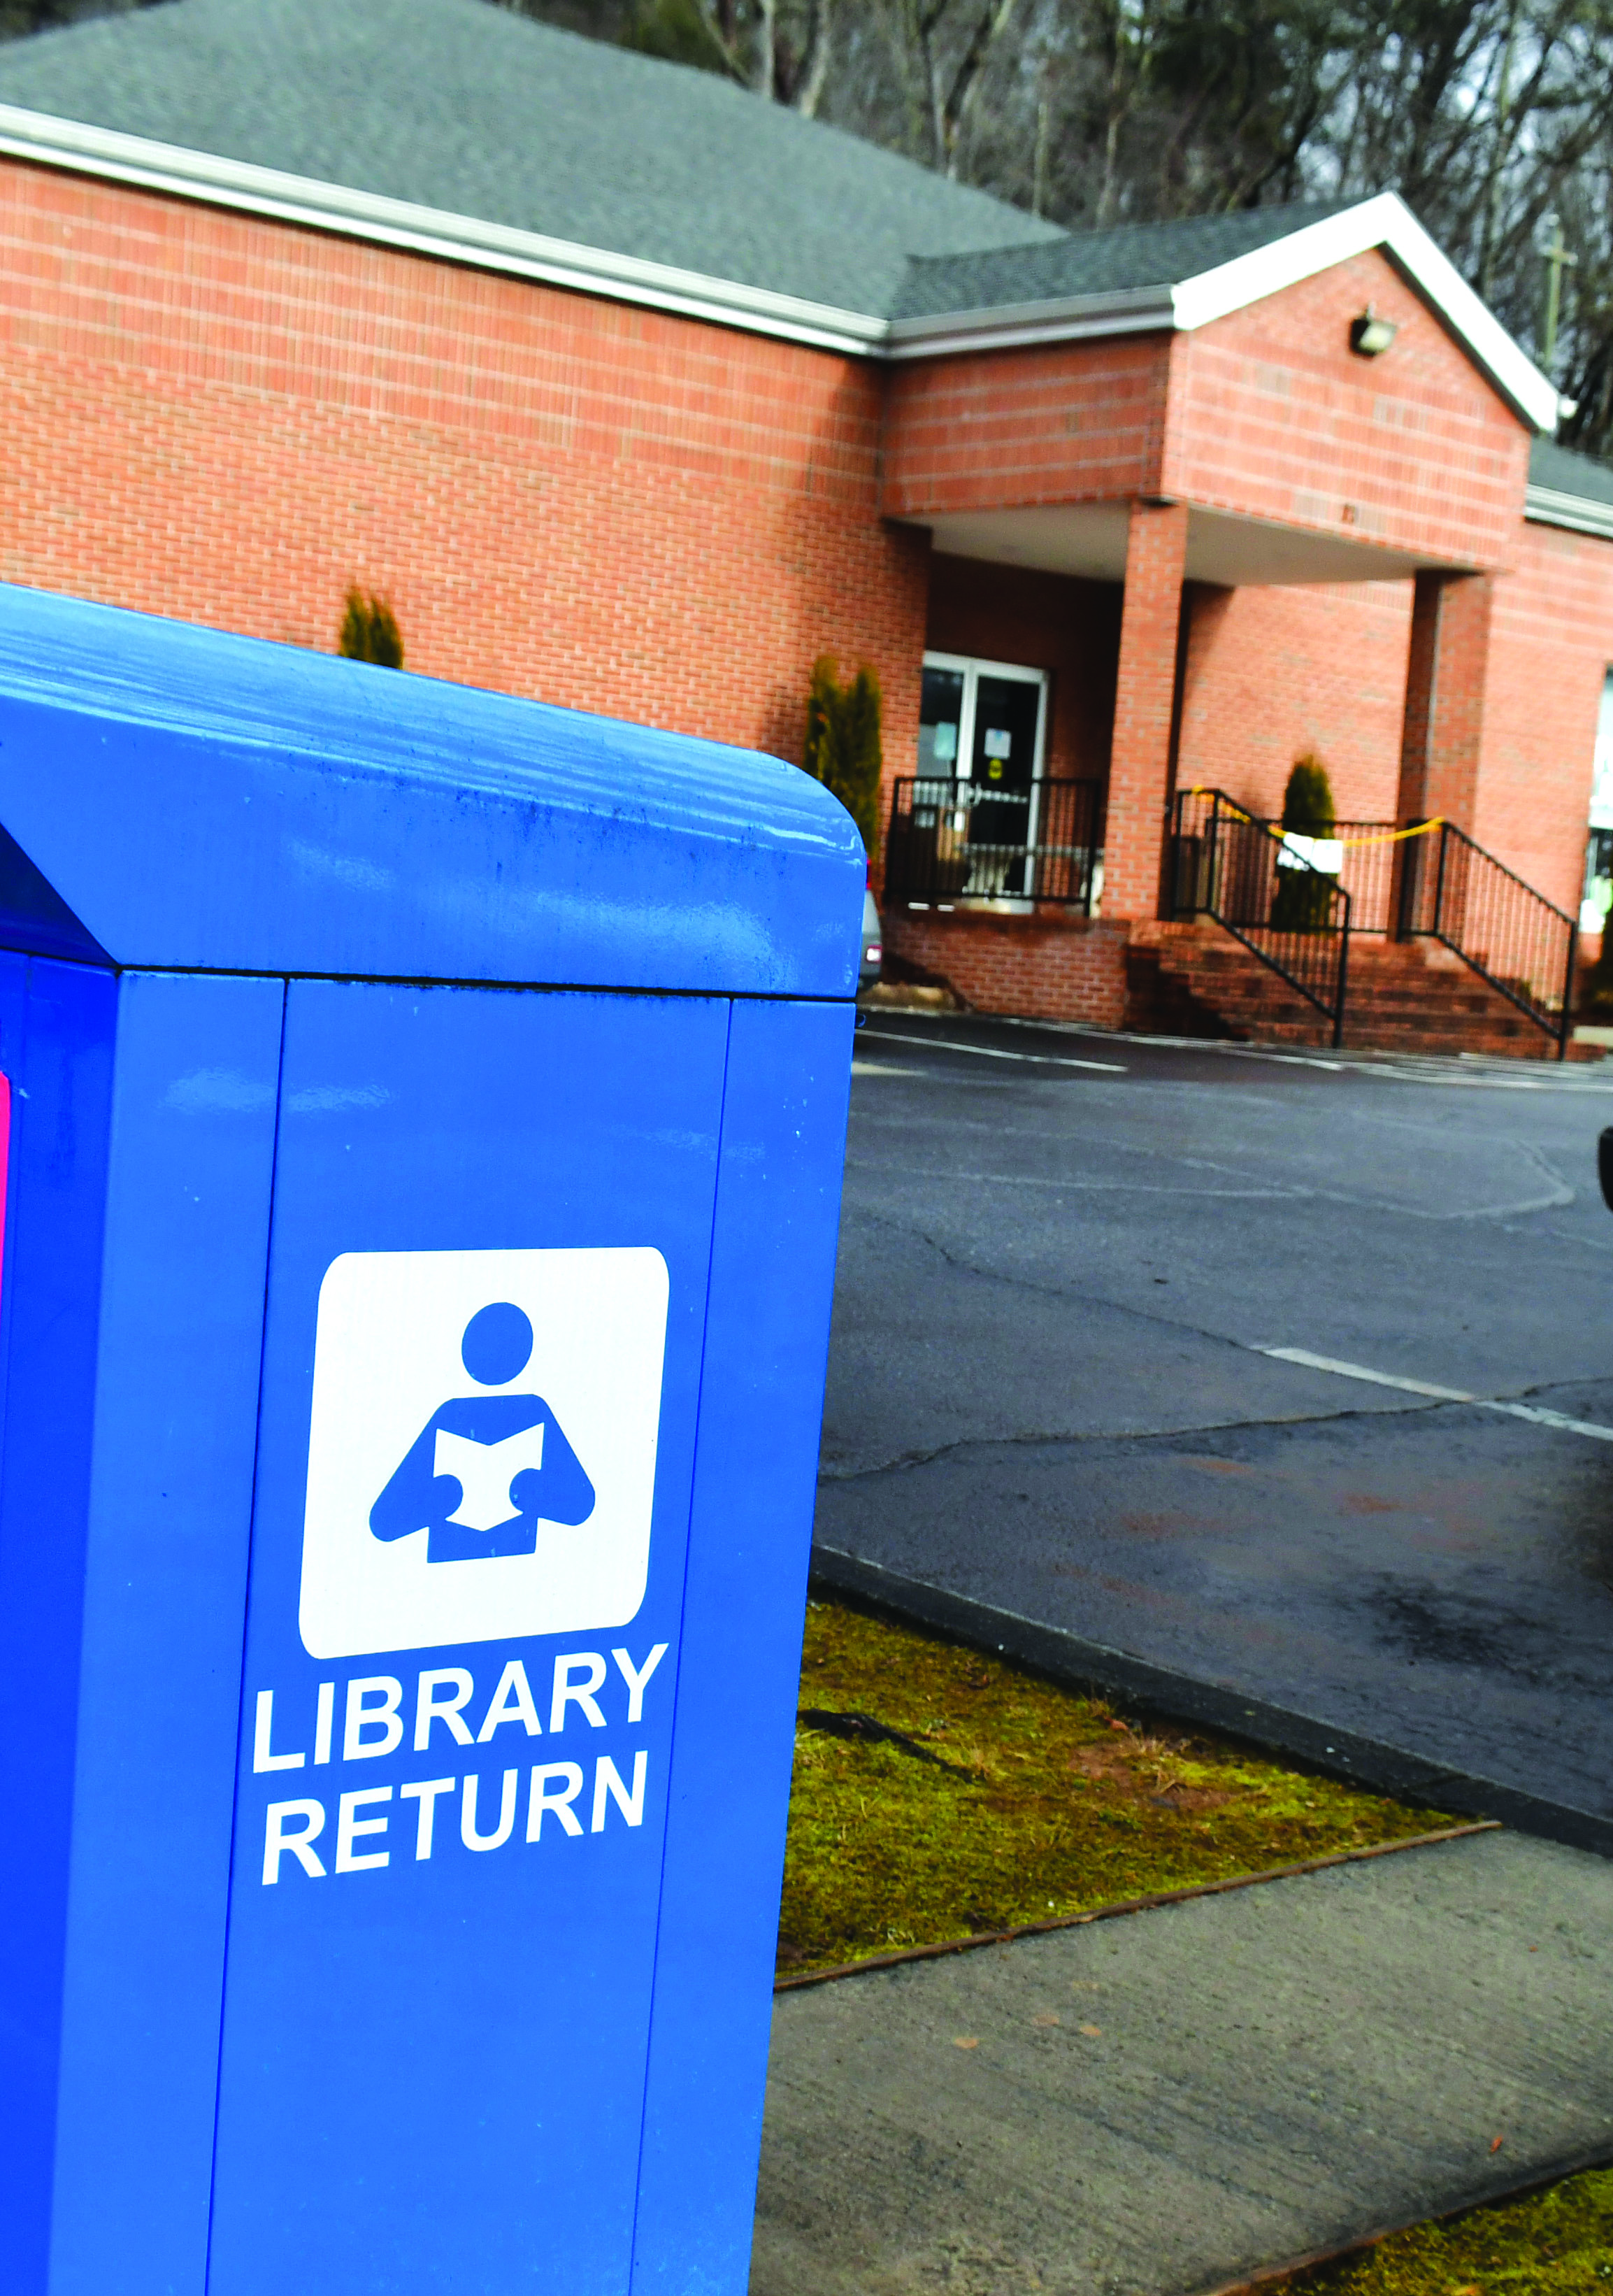 Megan Broome/The Clayton Tribune. Beginning Feb. 1, patrons can once again return books to the blue library return bins located in the parking lot. The feature was closed during the library closure for renovations. No late fees were accumulated for patrons during the closure. 